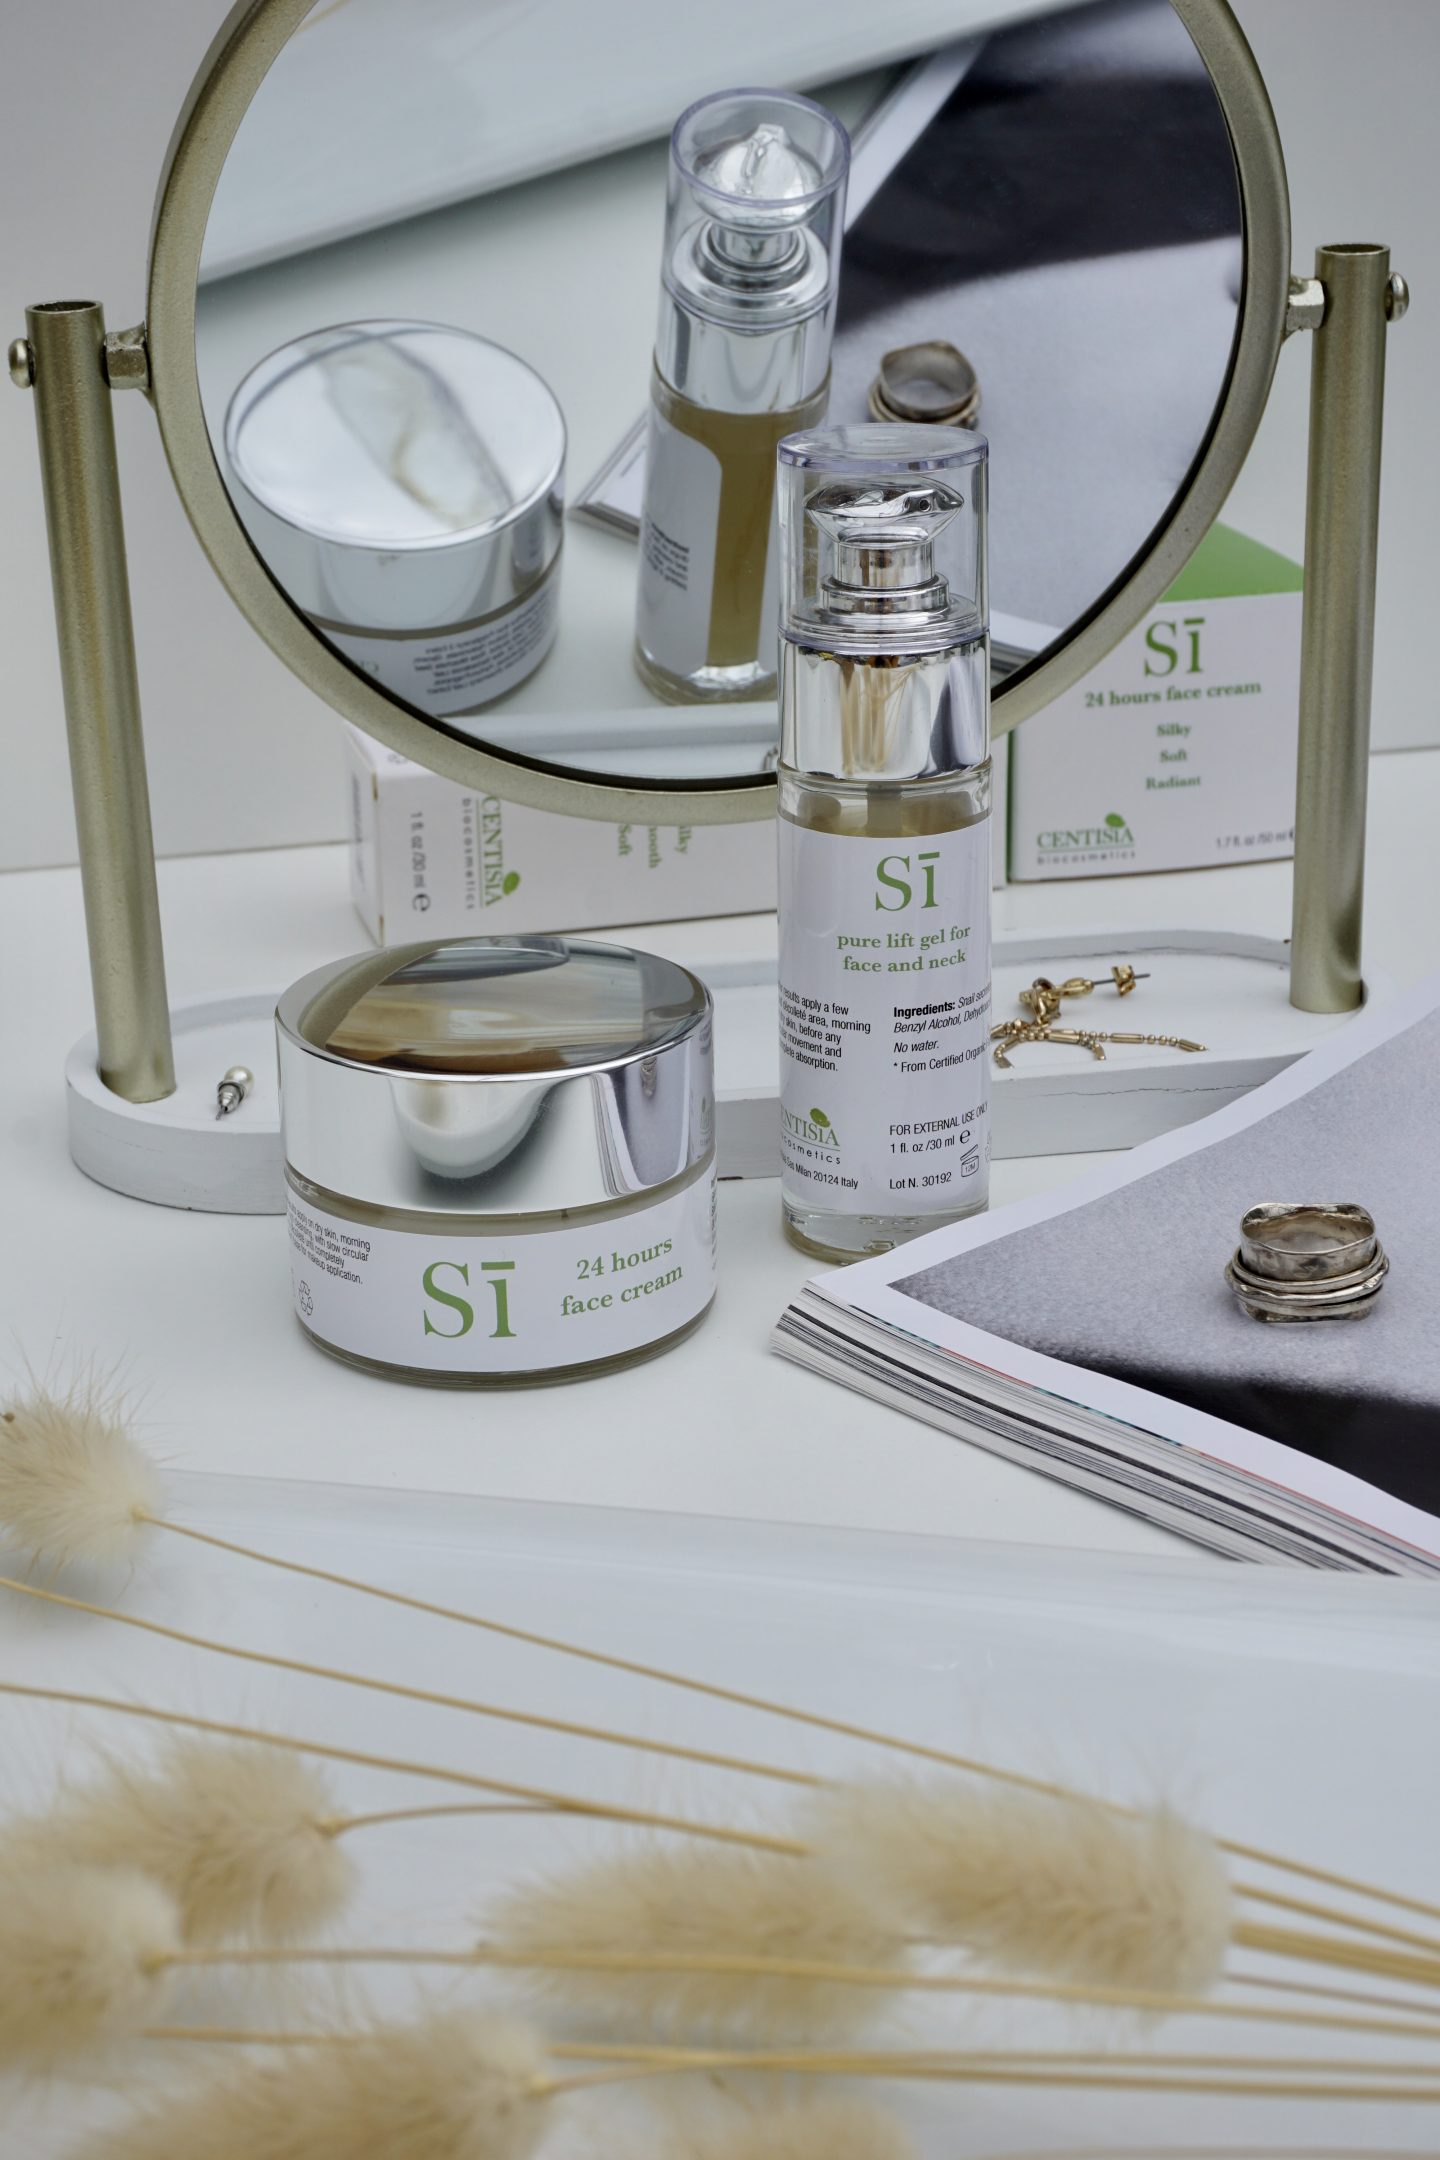 Two skincare products containing Snail Secretion filtrate